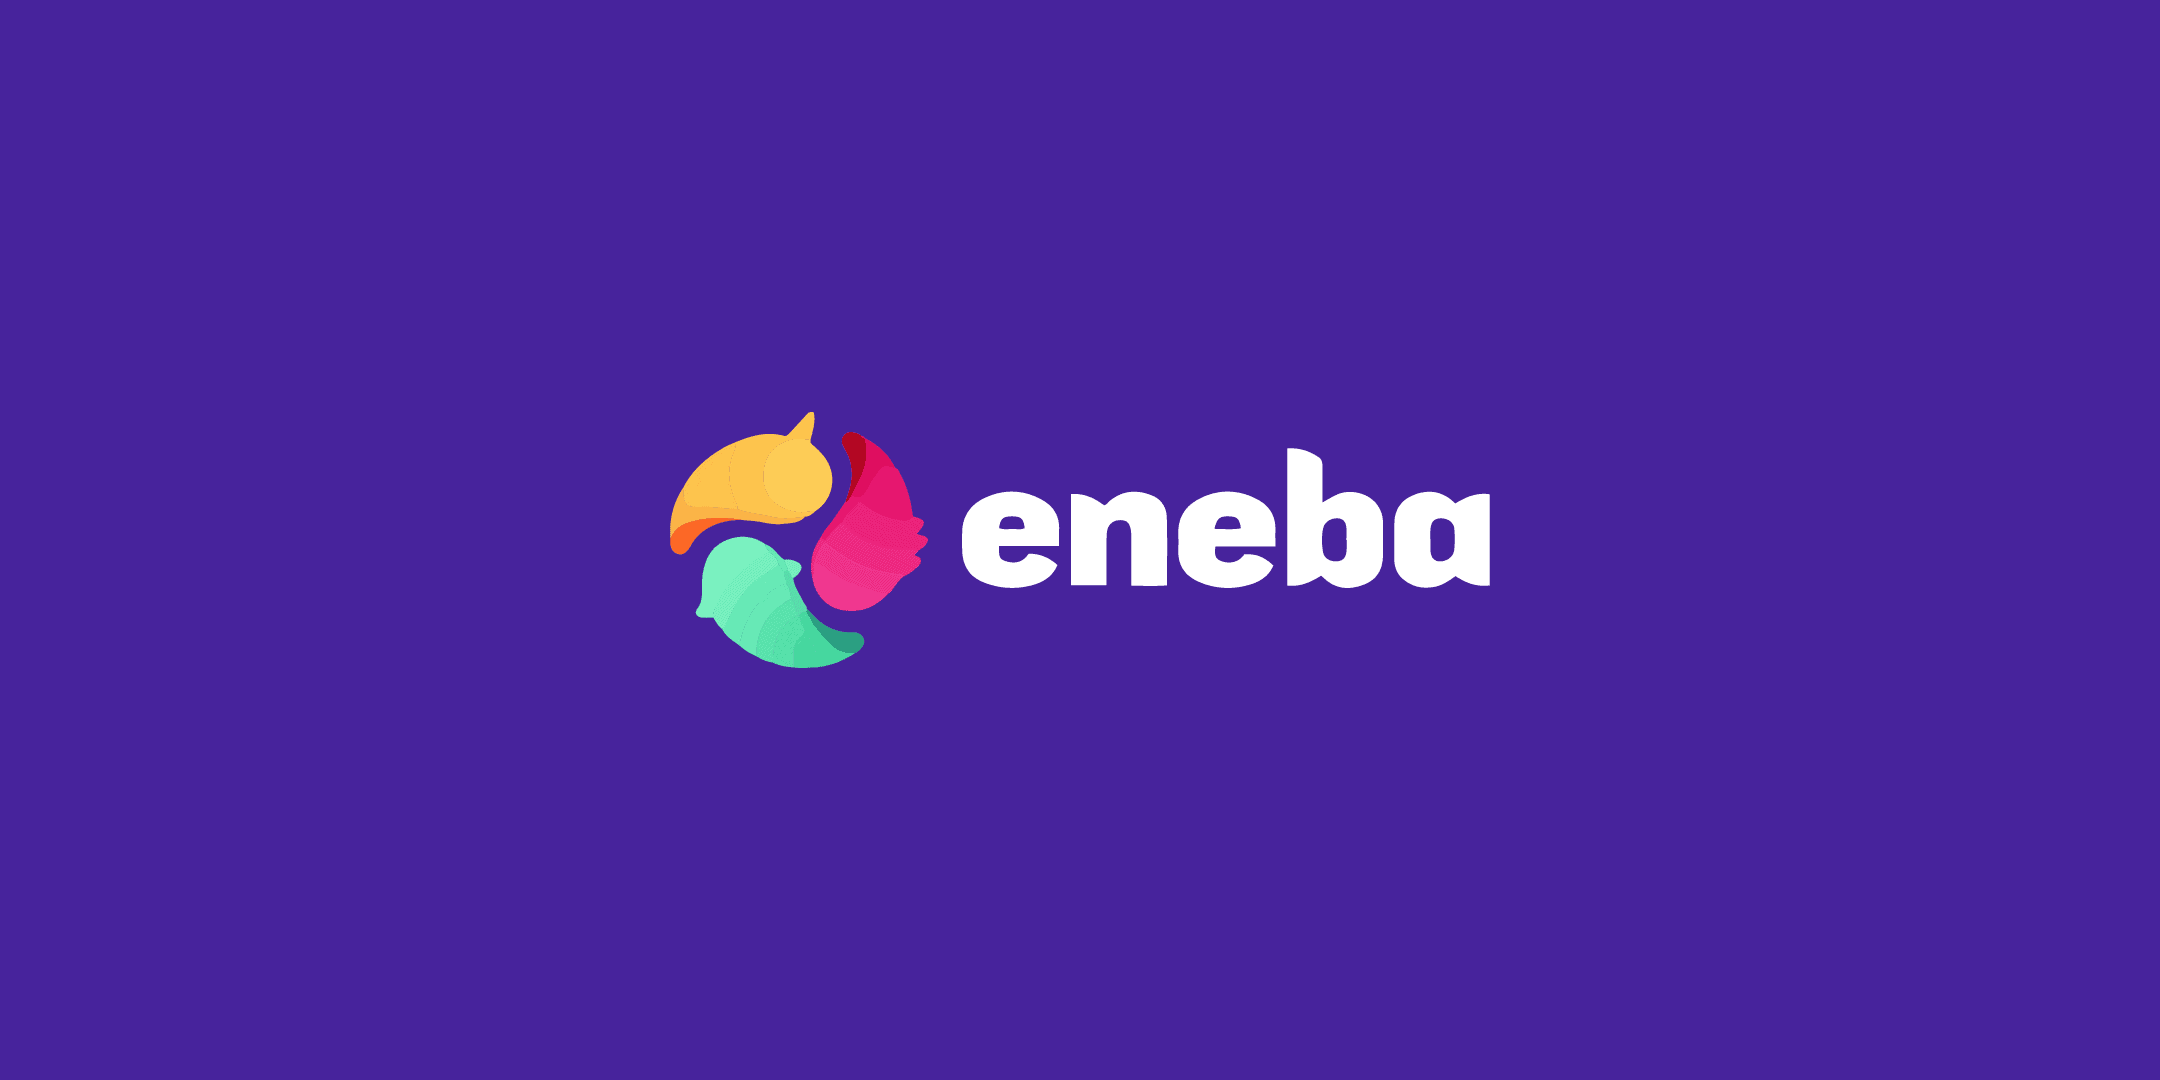 Eneba Coupons & Offers: 94% OFF Discount Promo Code December 2022